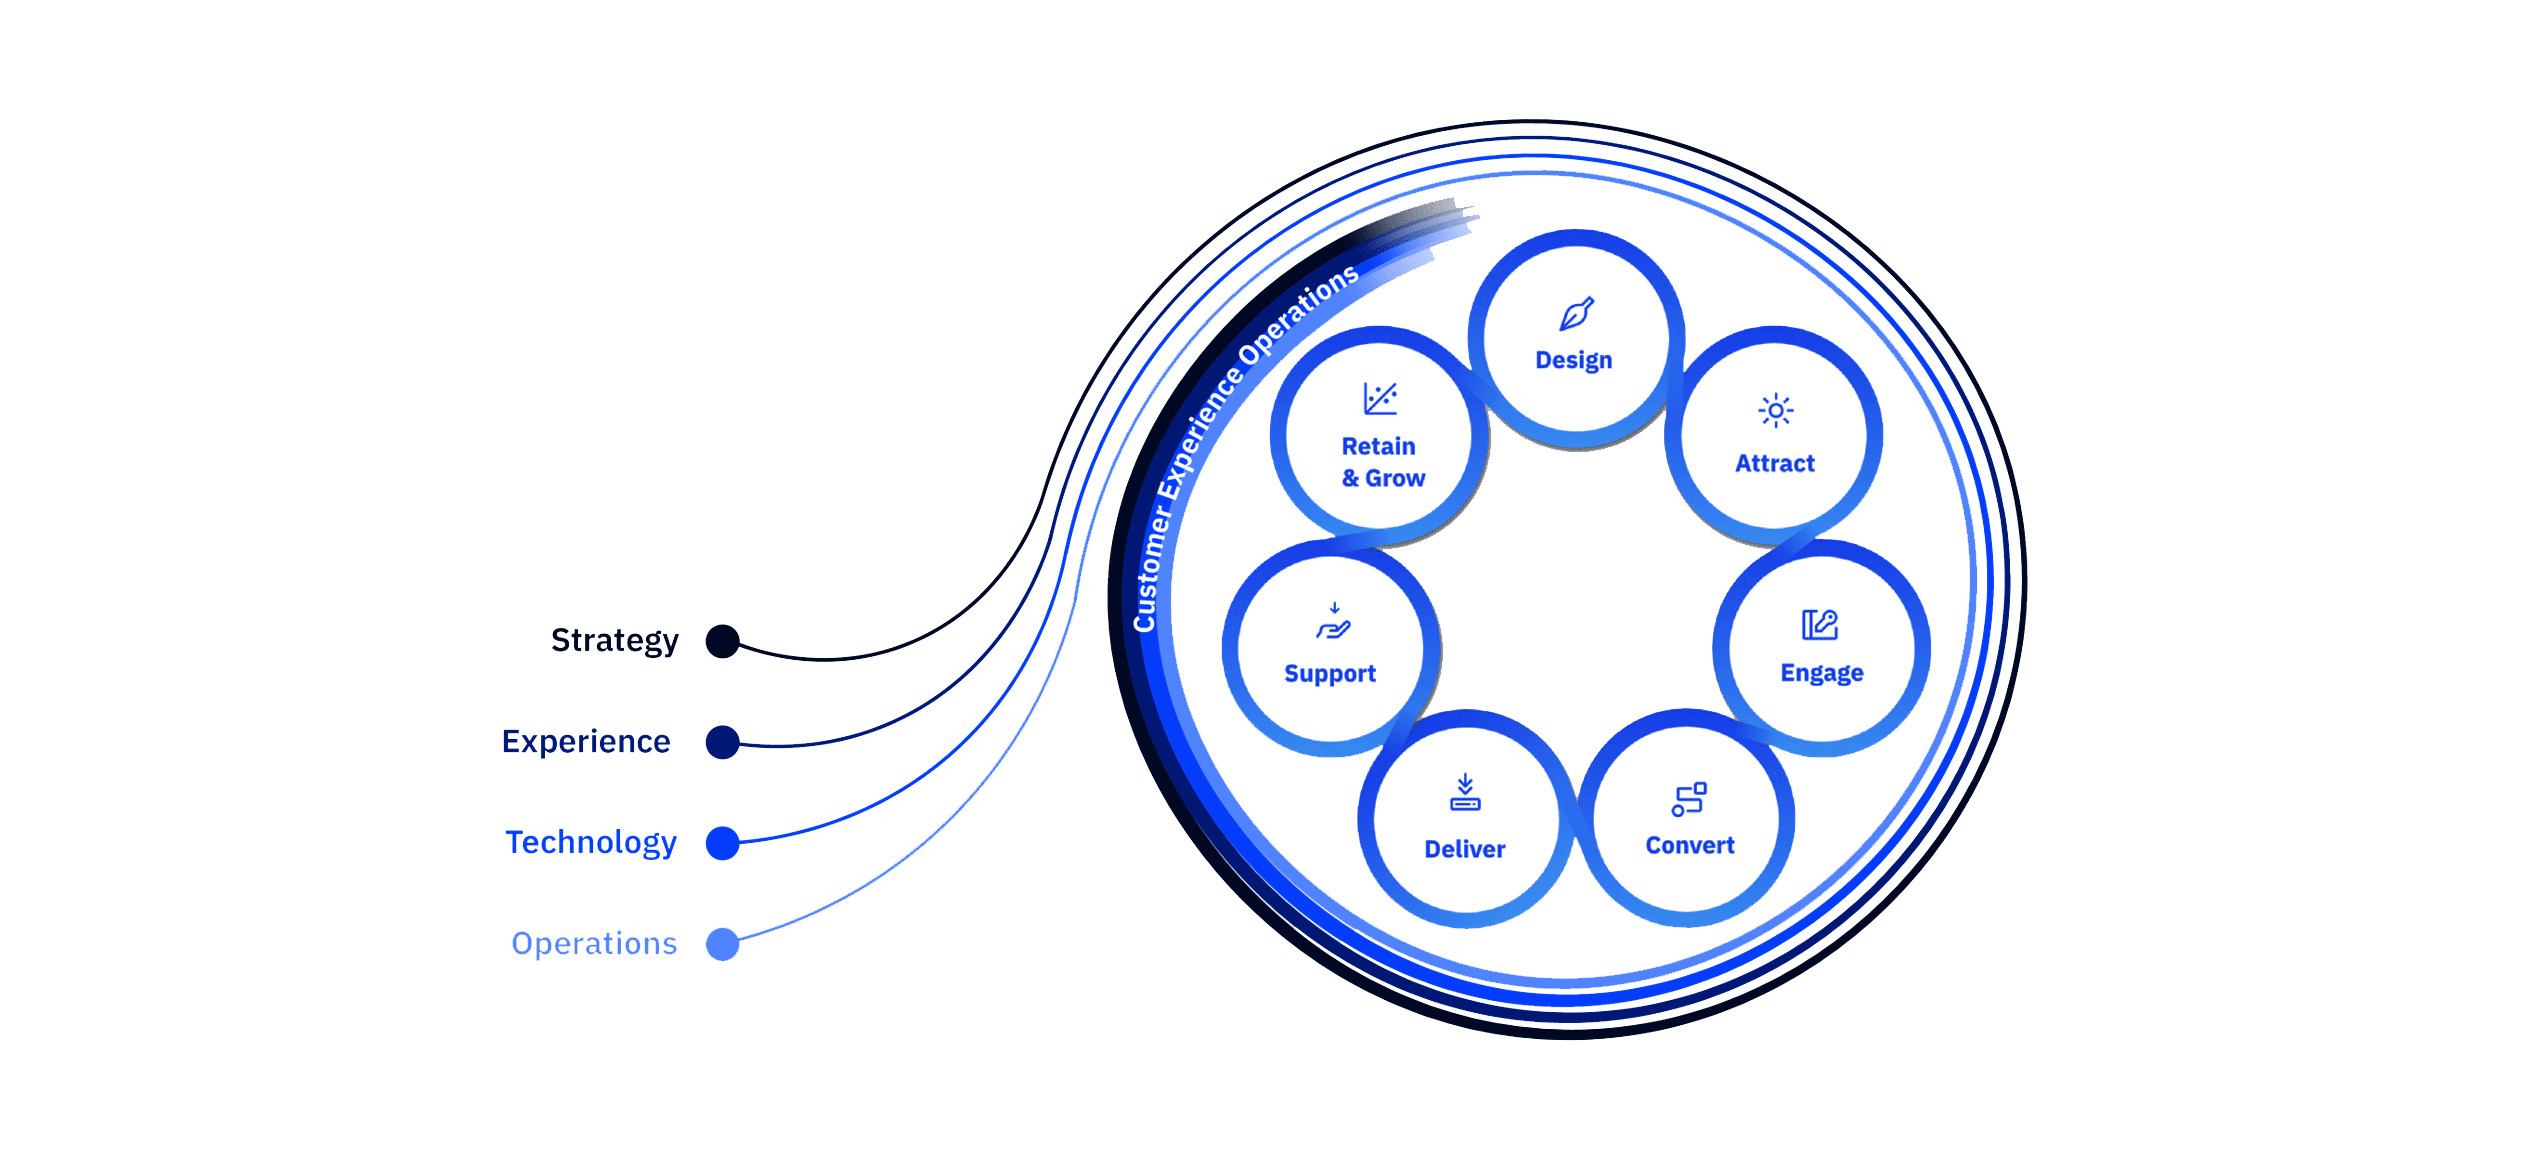 Image depicting interconnected strands leading to a circle labeled 'Customer Experience Operations', surrounded by key elements: Strategy, Experience, Technology, and Operations. Within the circle, stages are highlighted: Design, Attract, Engage, Convert, Deliver, Support, Retain & Grow.